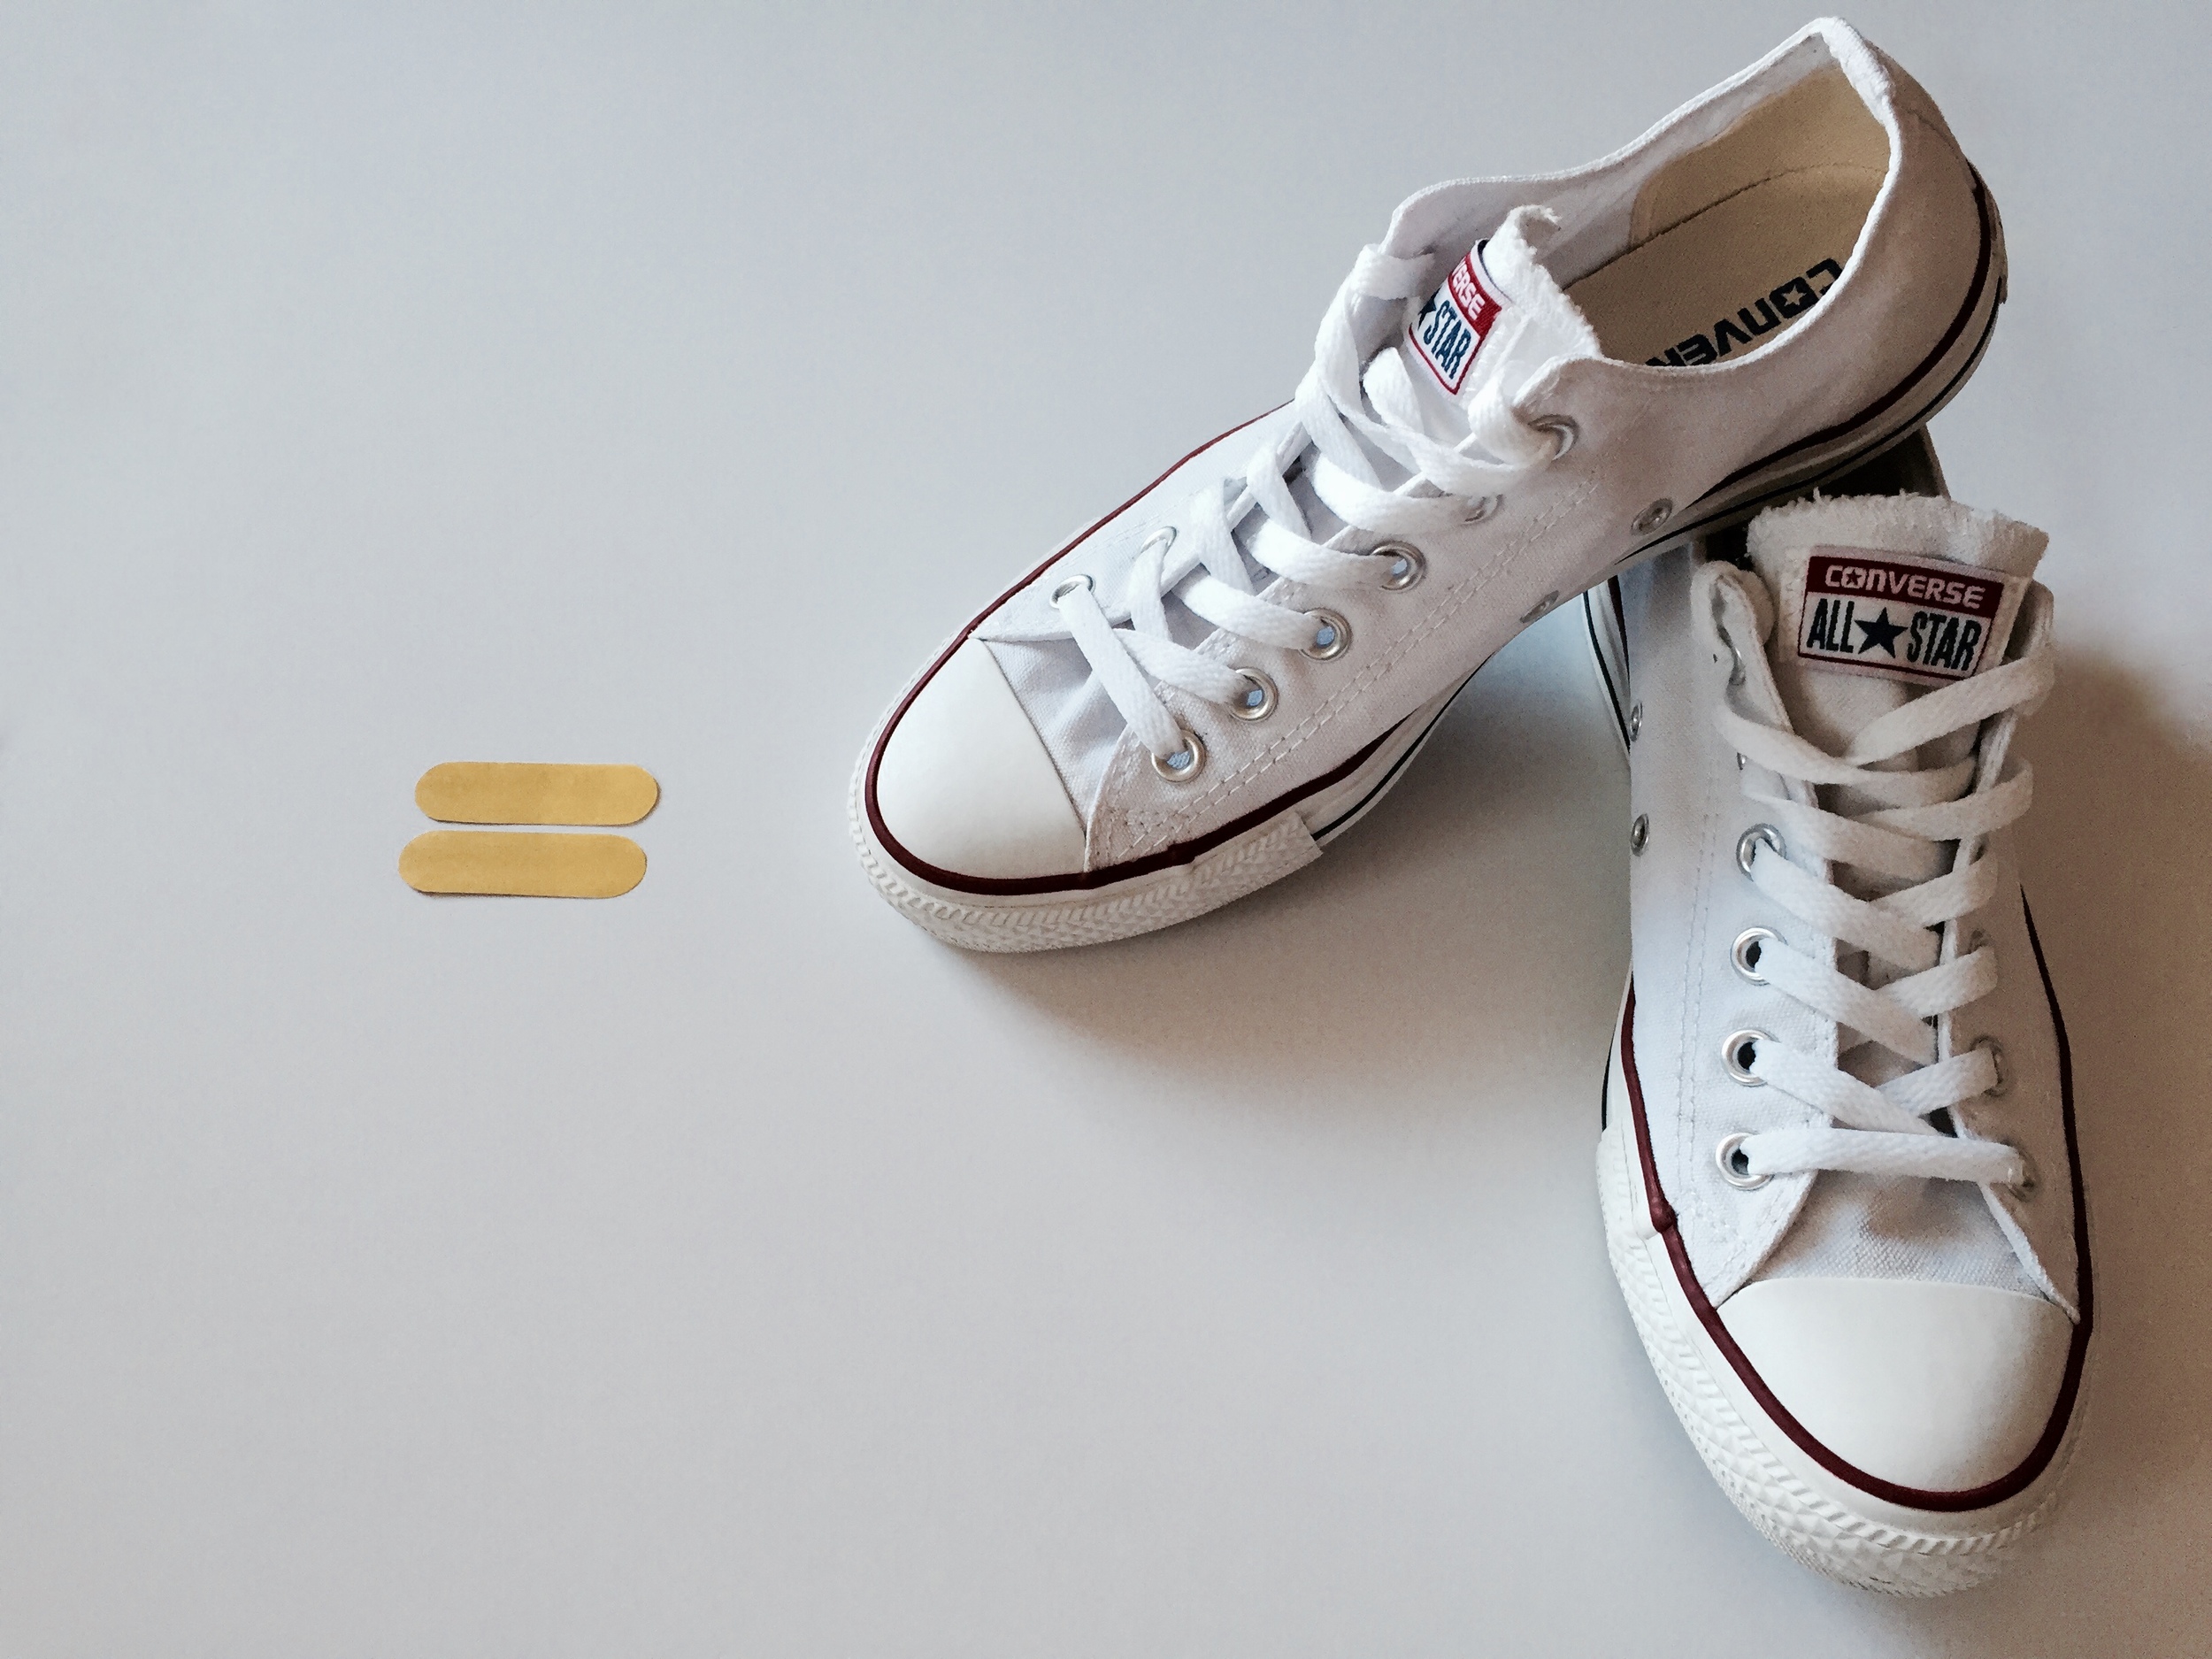 how to clean converse in washing machine